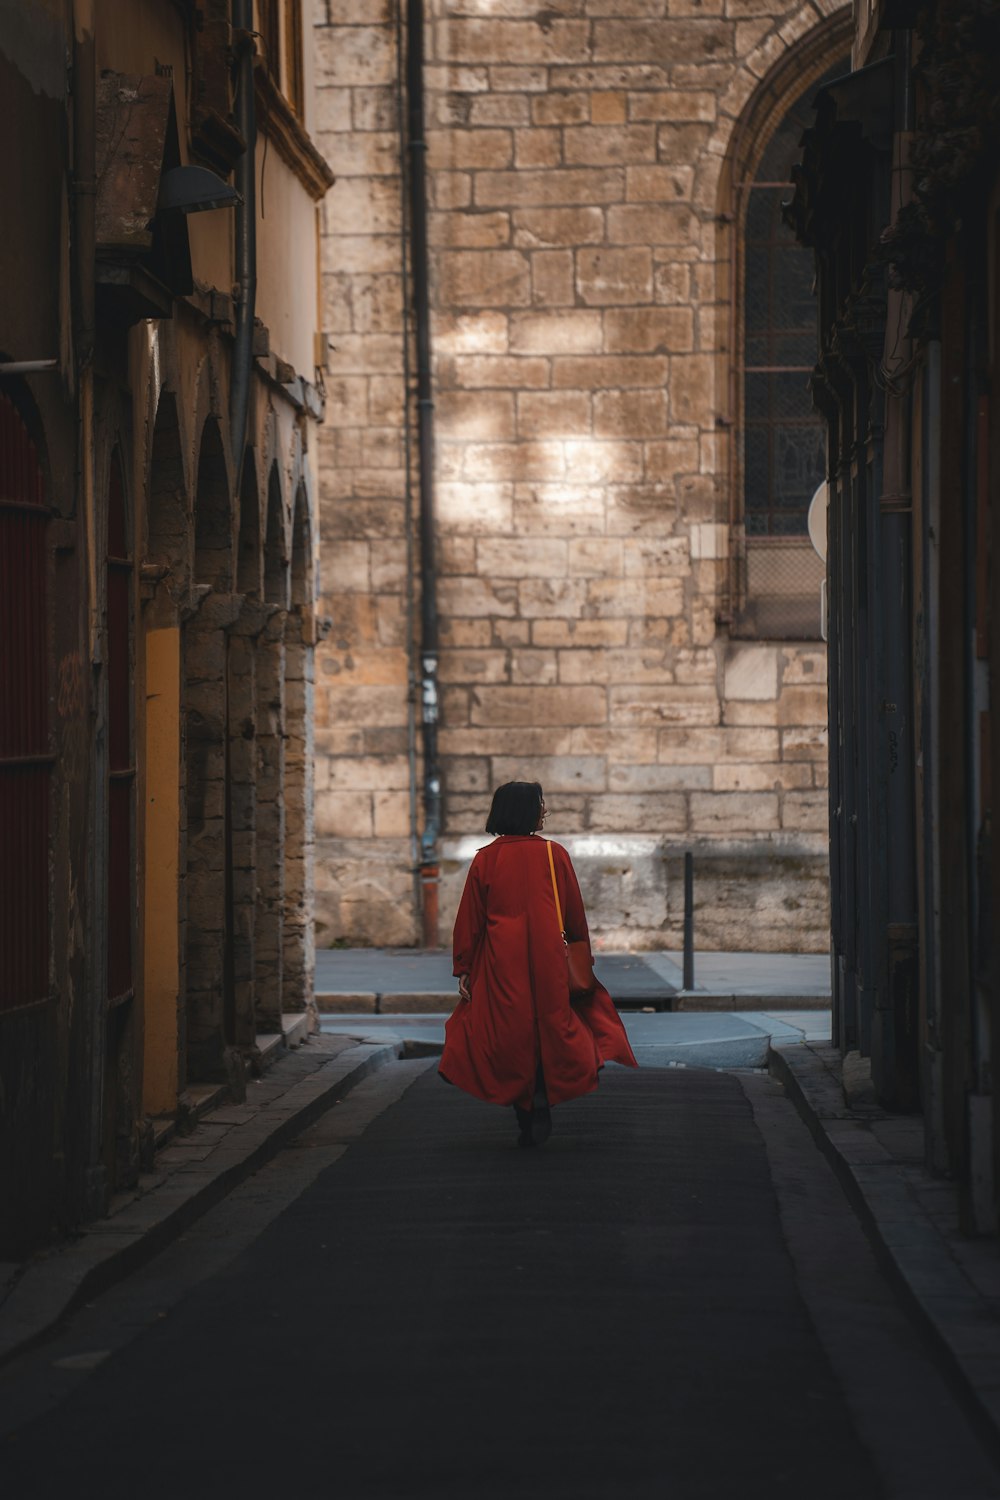 a person in a red robe walking down a street